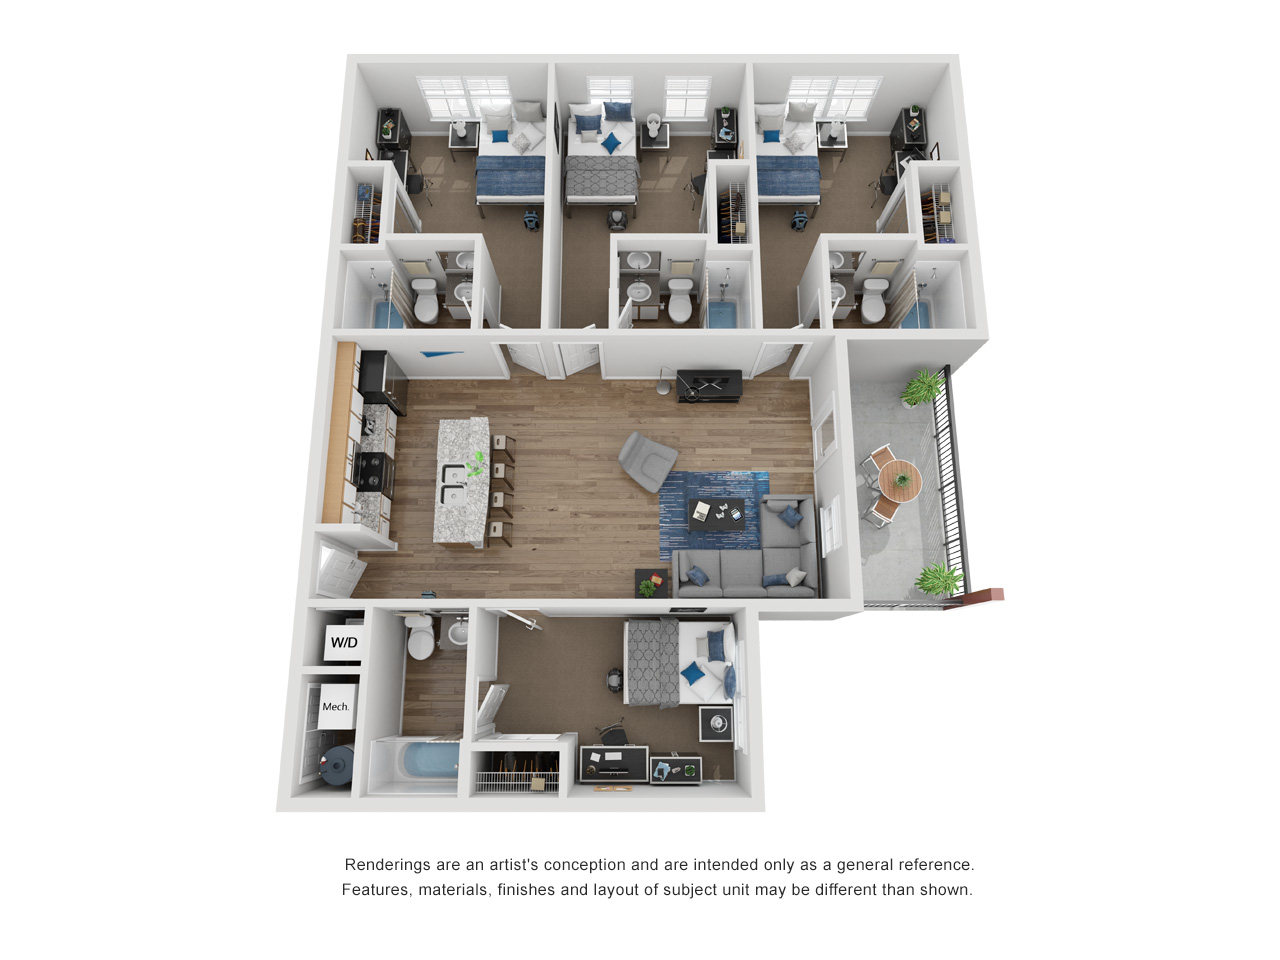 Floor plan of a four bed, four bath student apartment